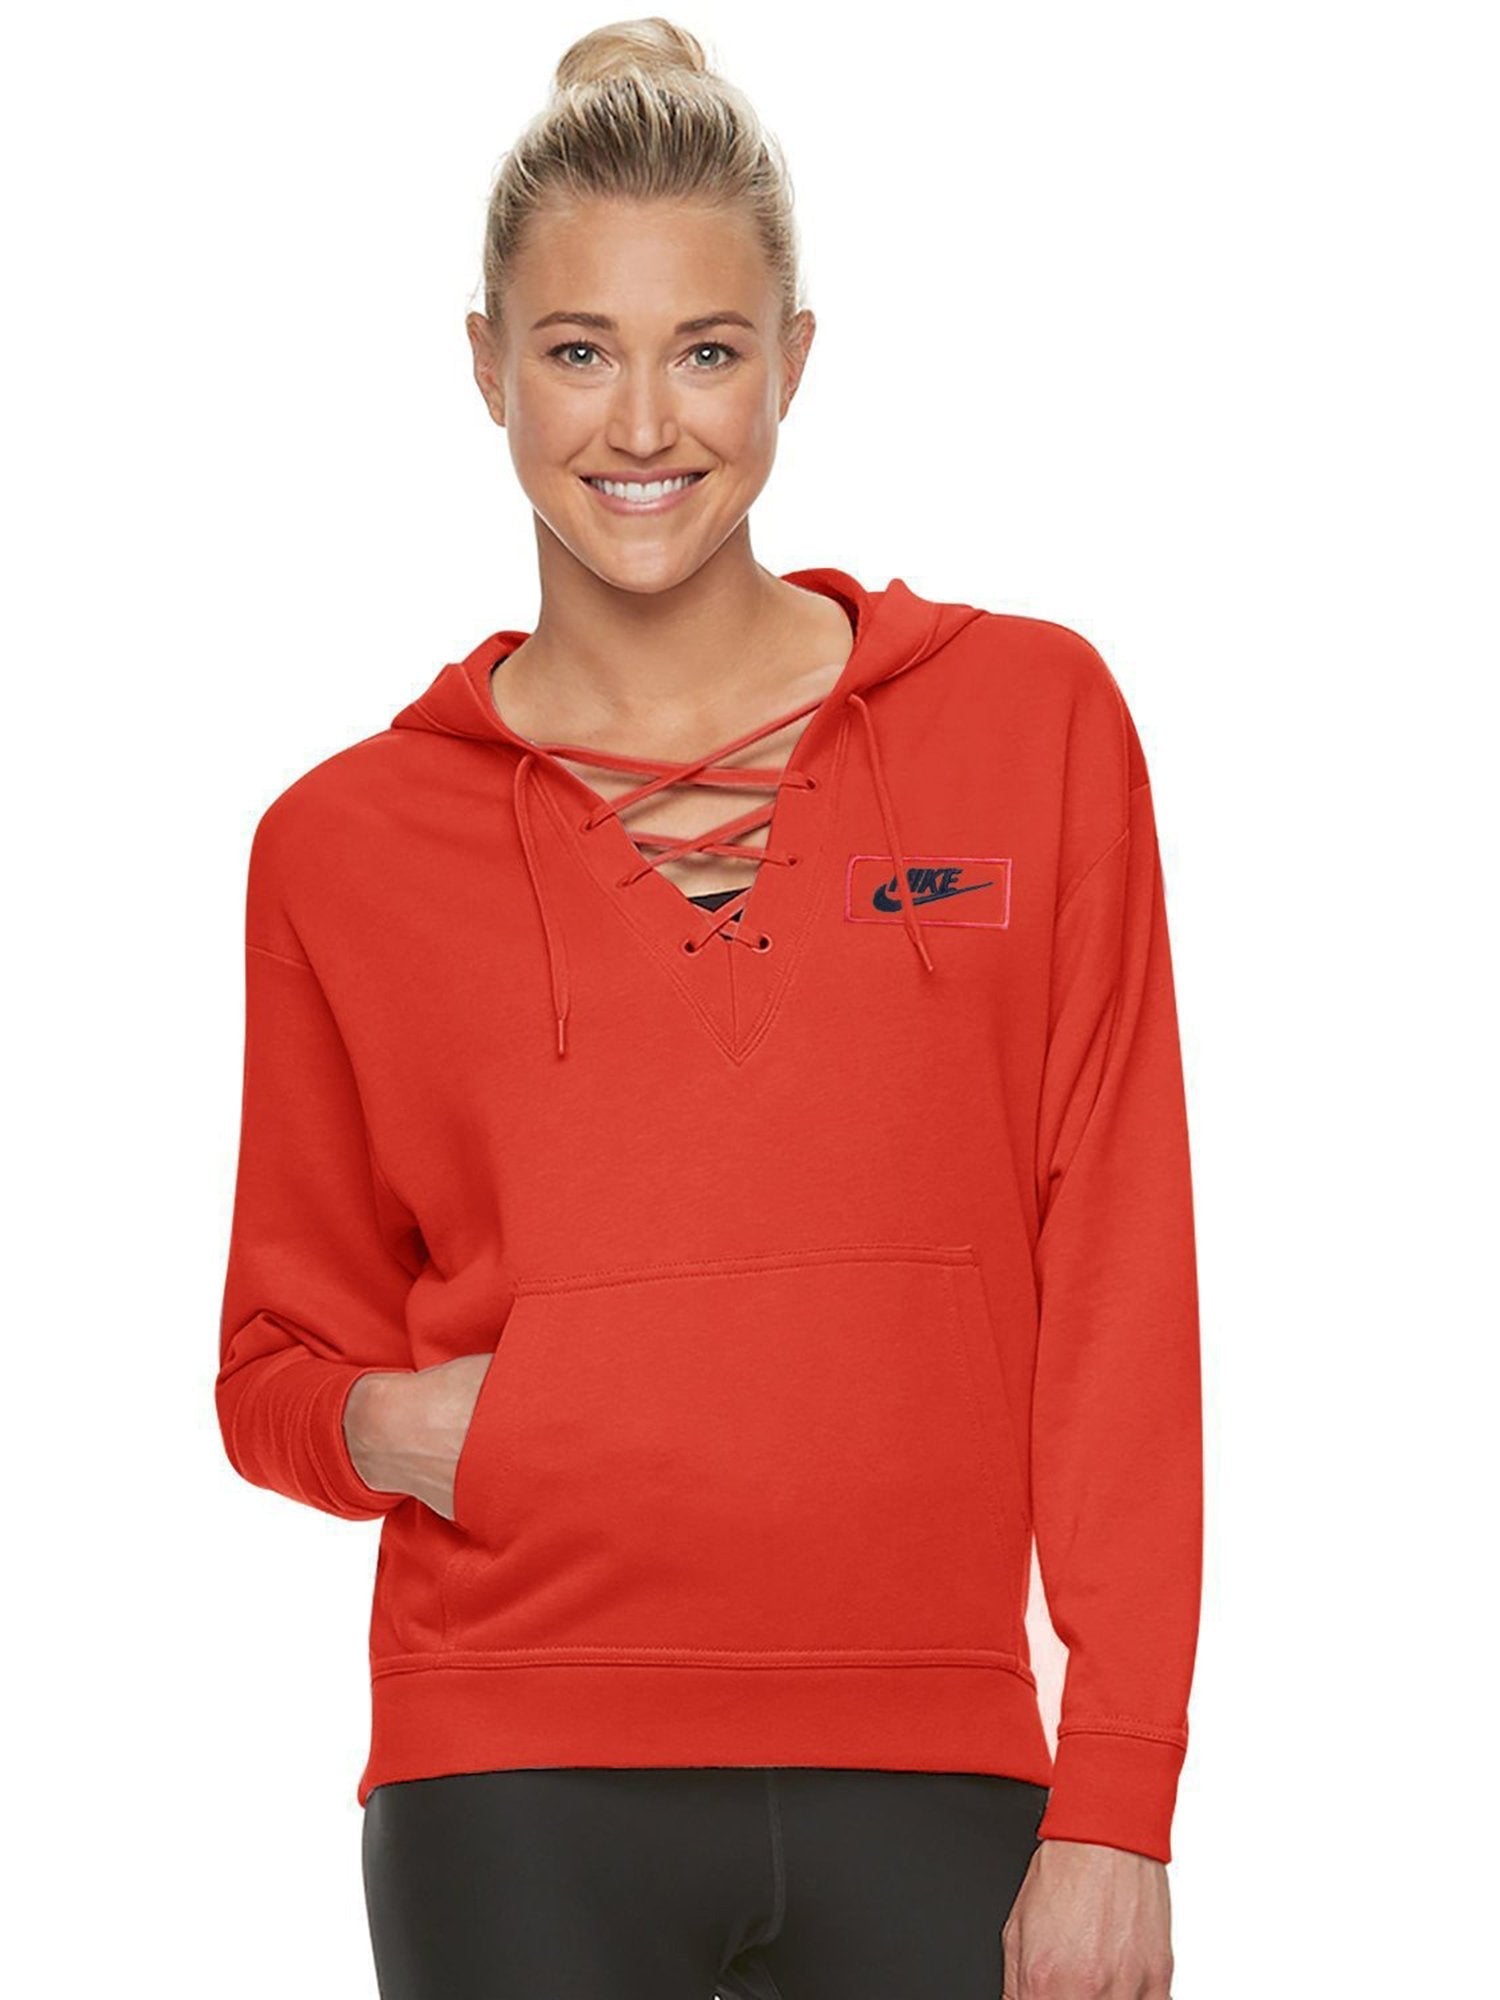 NK Terry Fleece Lace Up Hoodie For Ladies-Coral Orange-RT905